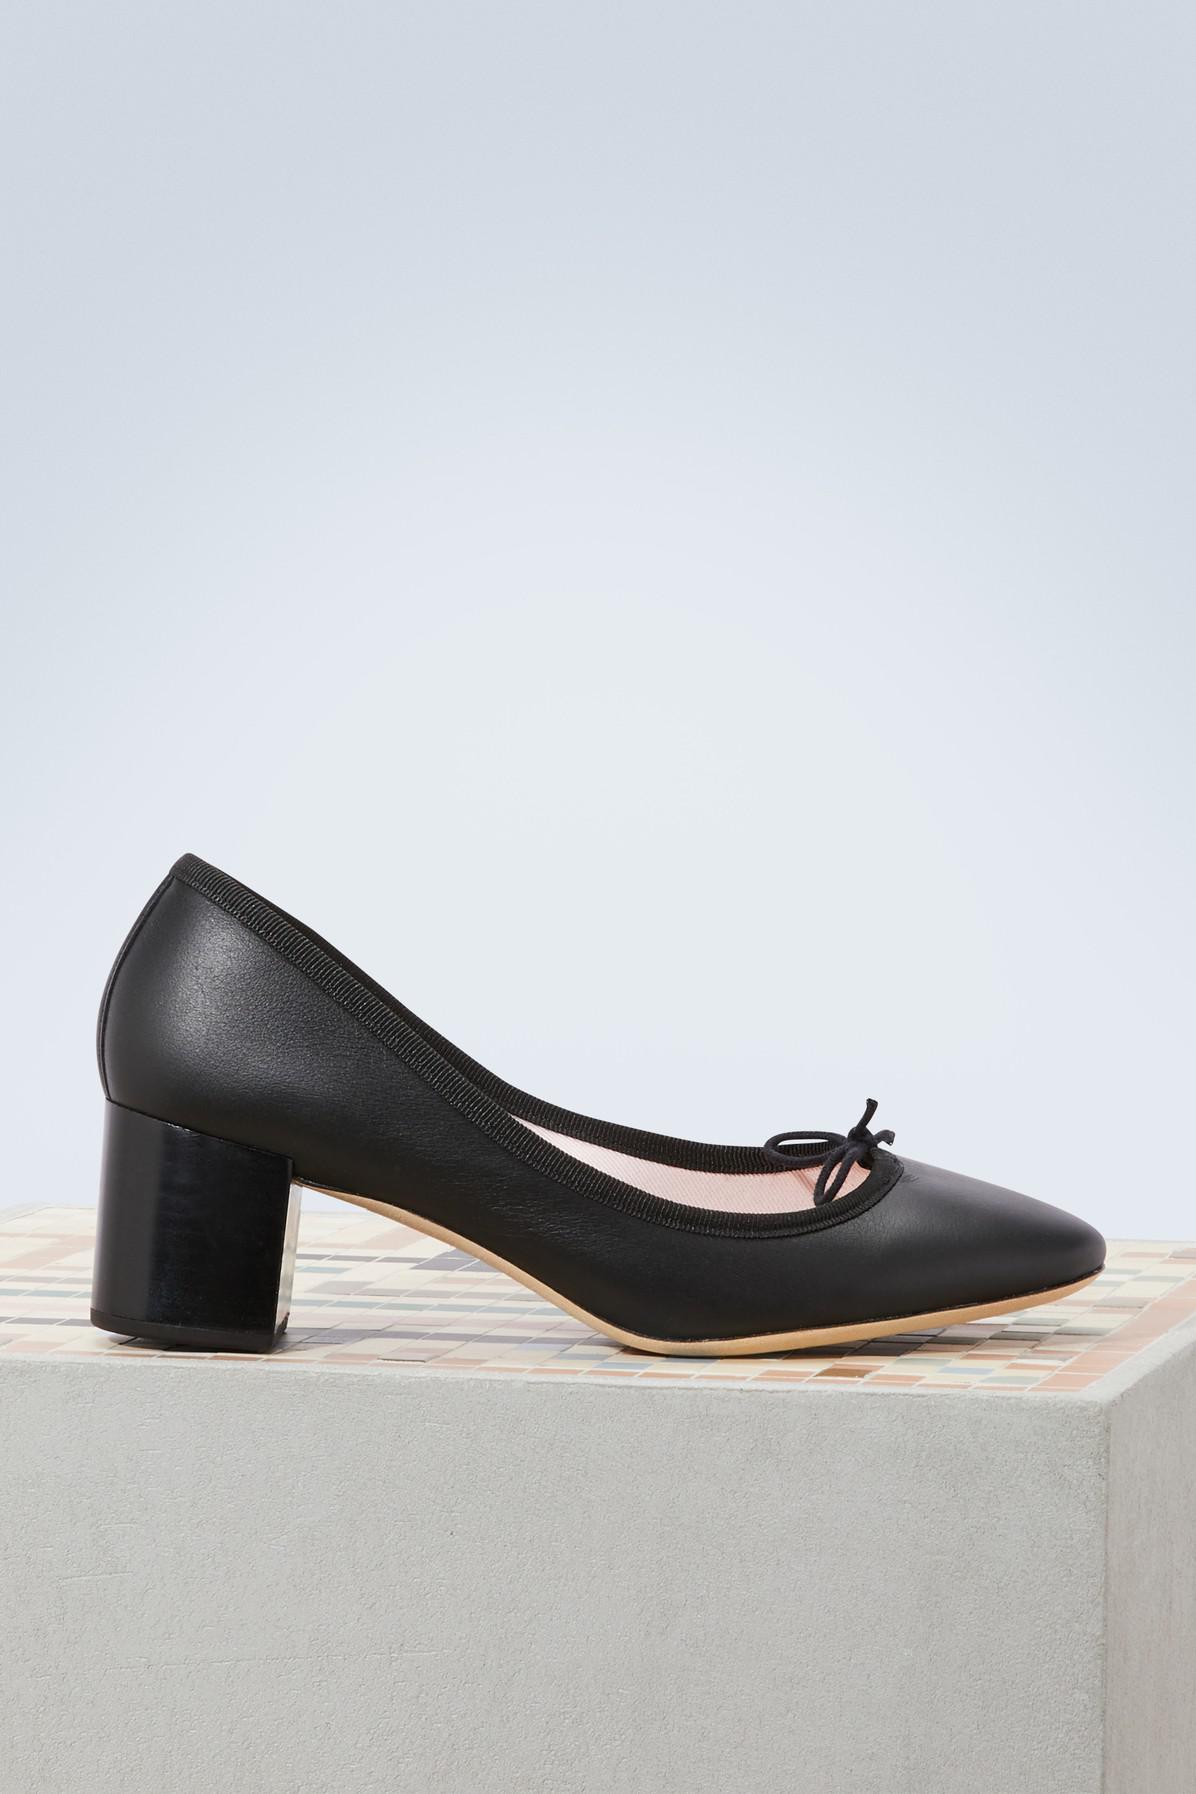 Repetto Farah Ballet Pumps With Heels in Black - Lyst